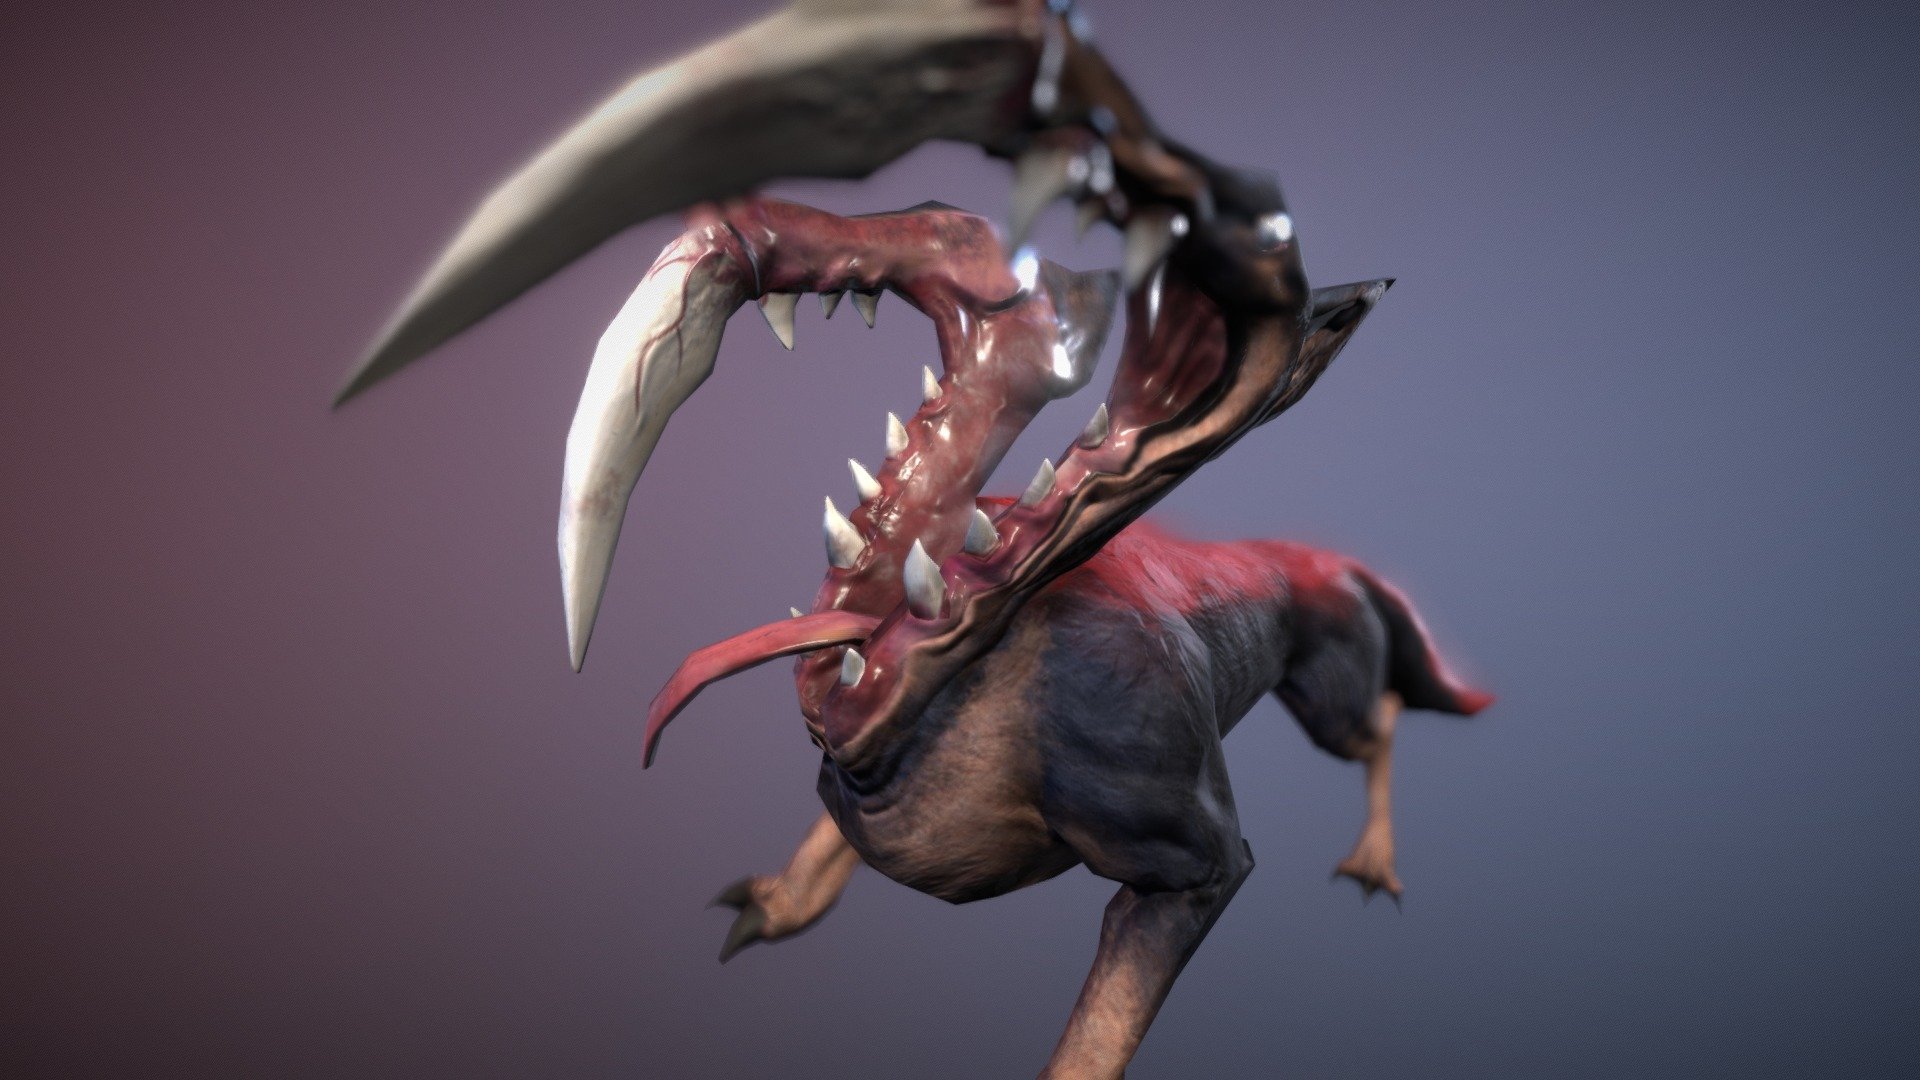 This is a lowpoly model I made based on Xuexiang Zhang concept art.
Concept: https://www.artstation.com/artwork/LRAbA

Hope you'll like it!

Artstation link: https://www.artstation.com/artwork/xv8Q2 - Biochemical Dog - Download Free 3D model by Myranda 3d model